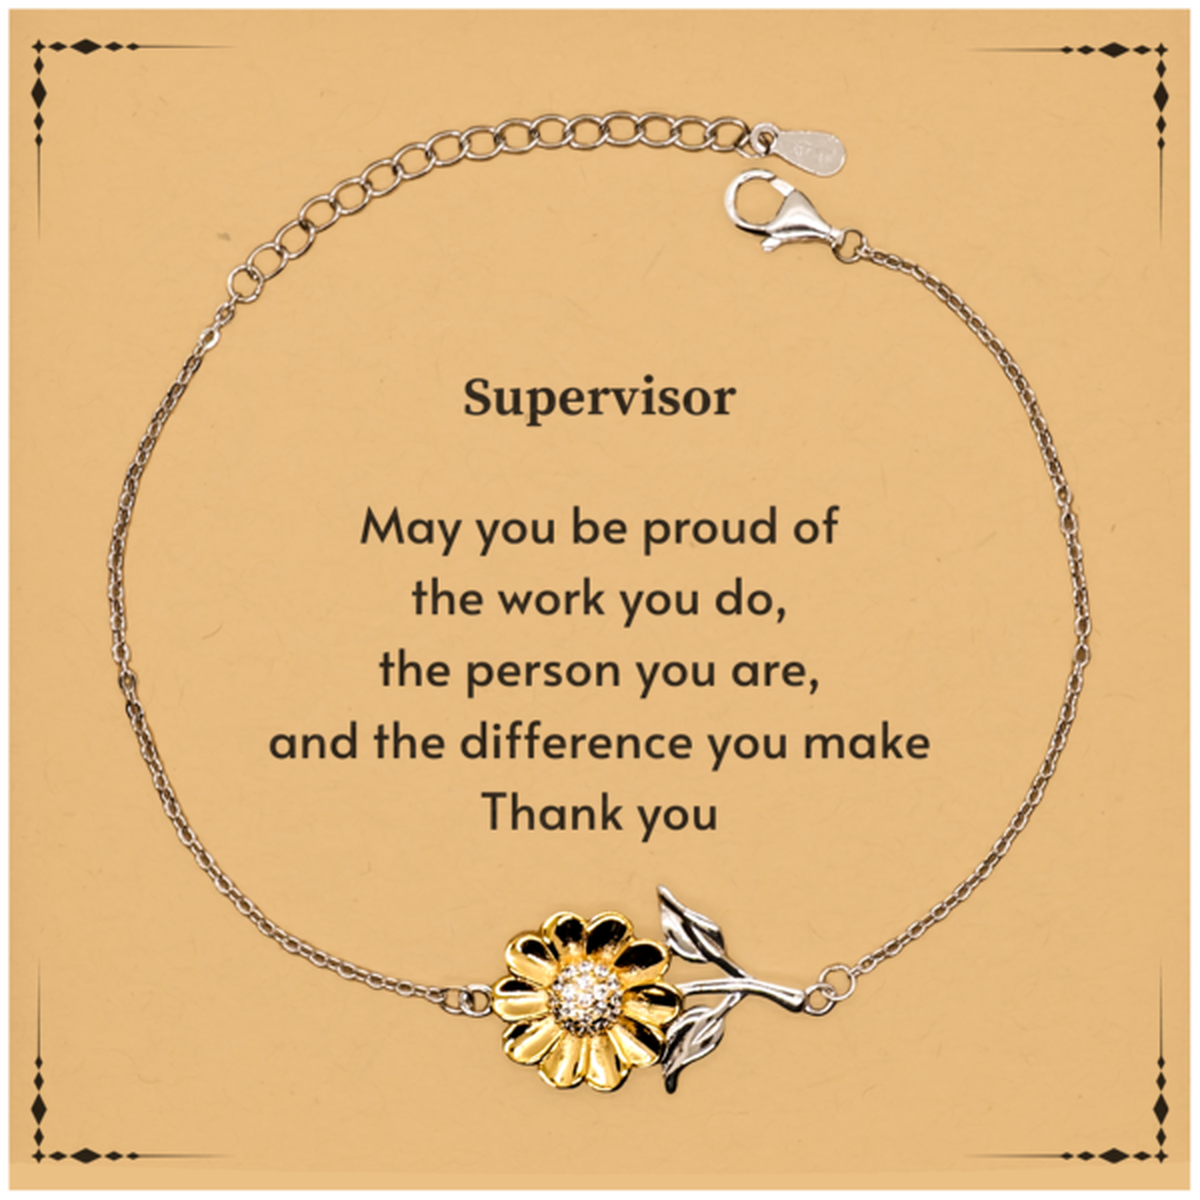 Heartwarming Sunflower Bracelet Retirement Coworkers Gifts for Supervisor, Supervisor May You be proud of the work you do, the person you are Gifts for Boss Men Women Friends